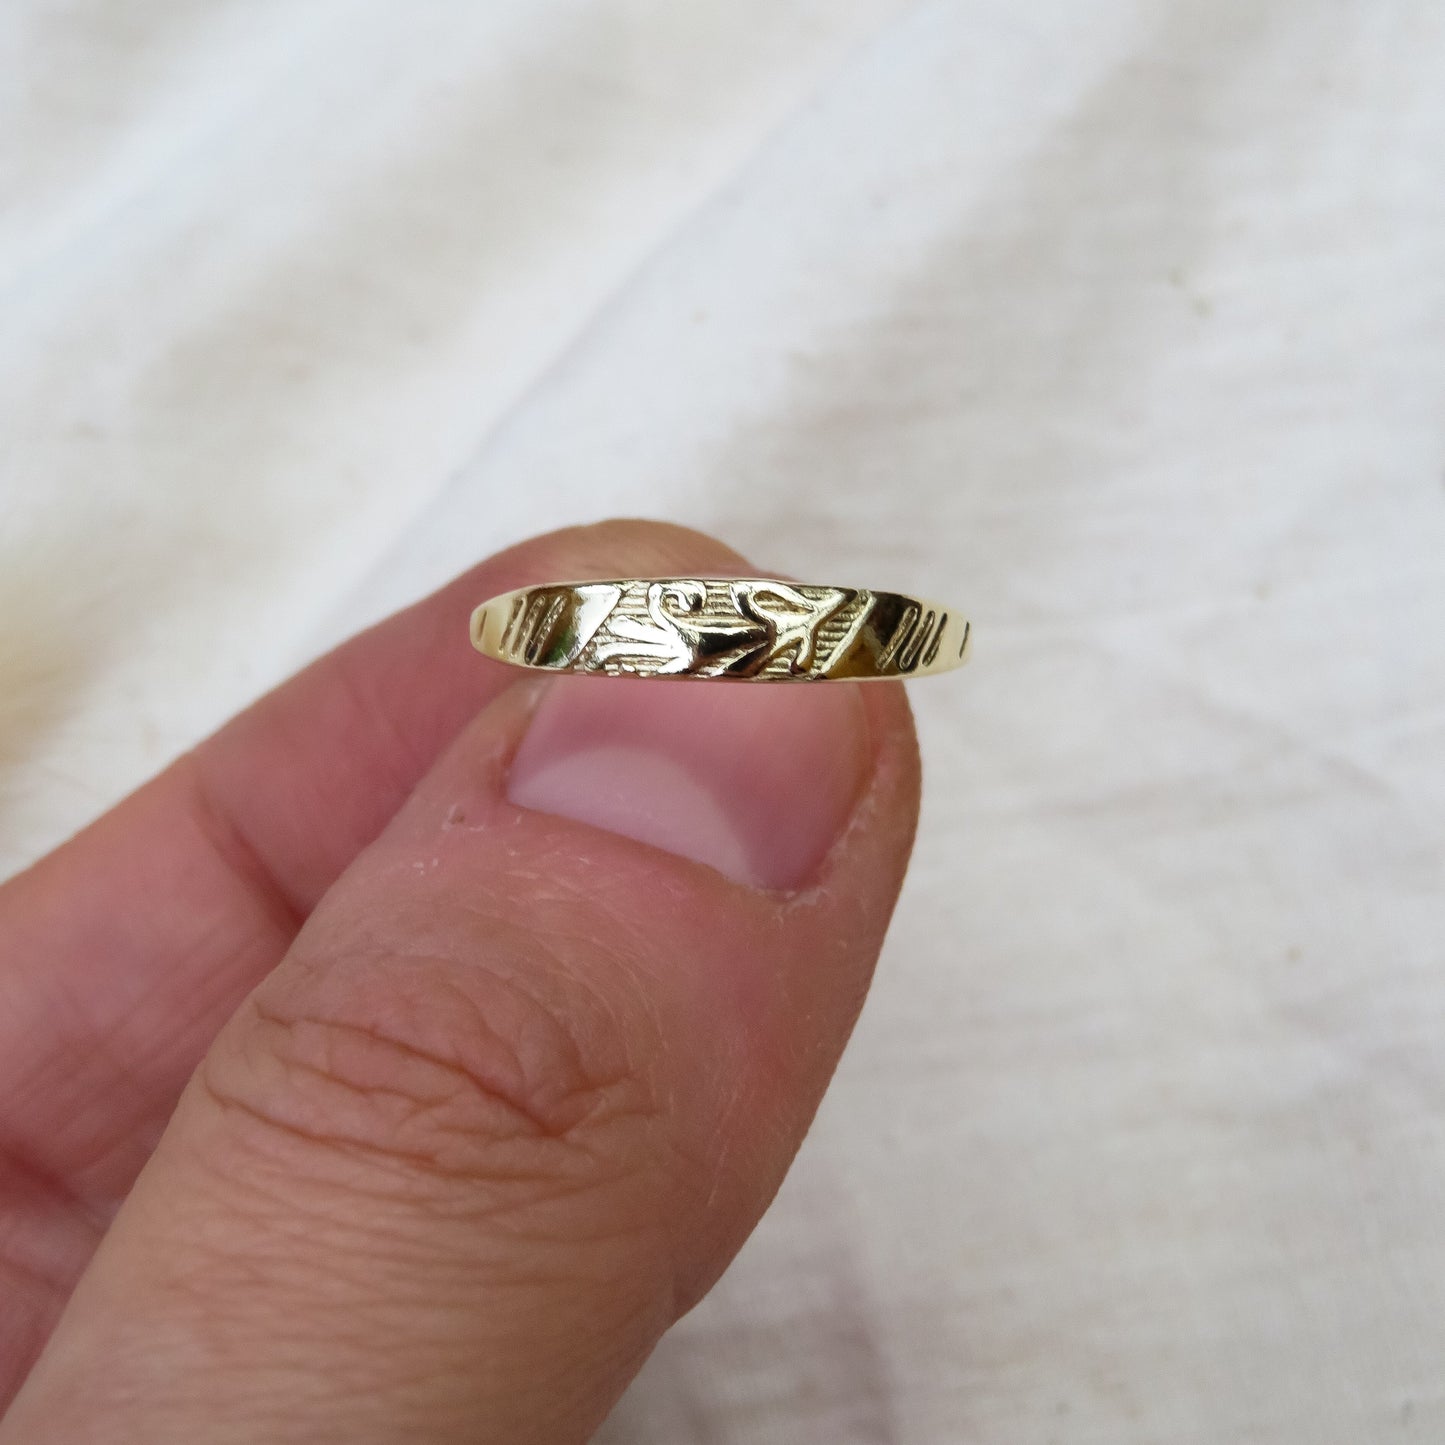 The Dainty Floral Ring in 9ct Gold